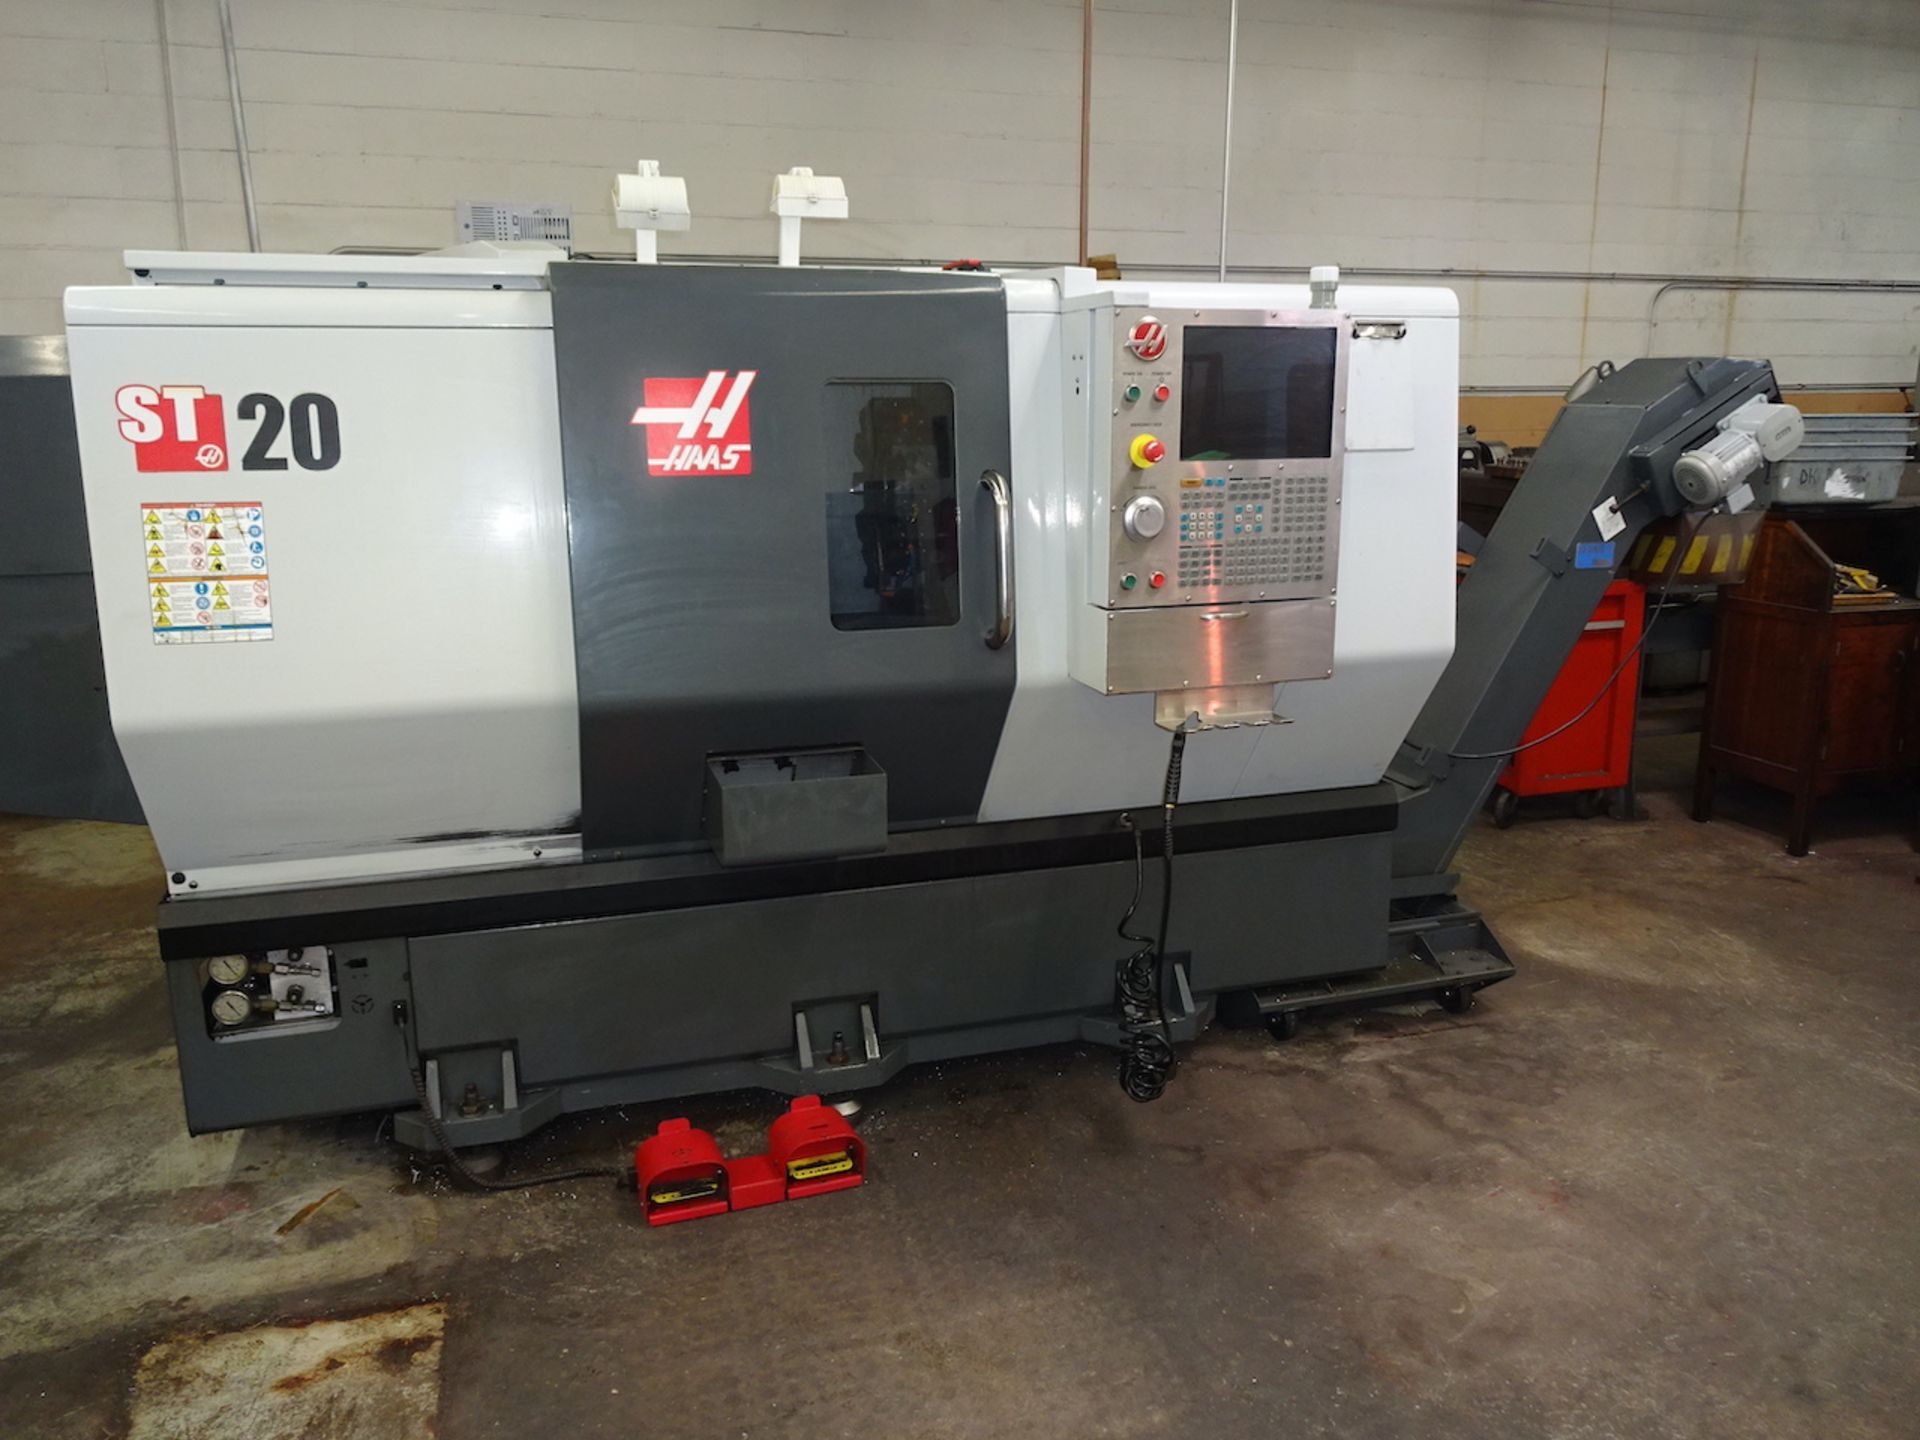 2012 Haas Model ST-20 CNC Turning Center, S/N 3093285, 12 Station Turret, Auto Tool Pre-Setter, - Image 3 of 13